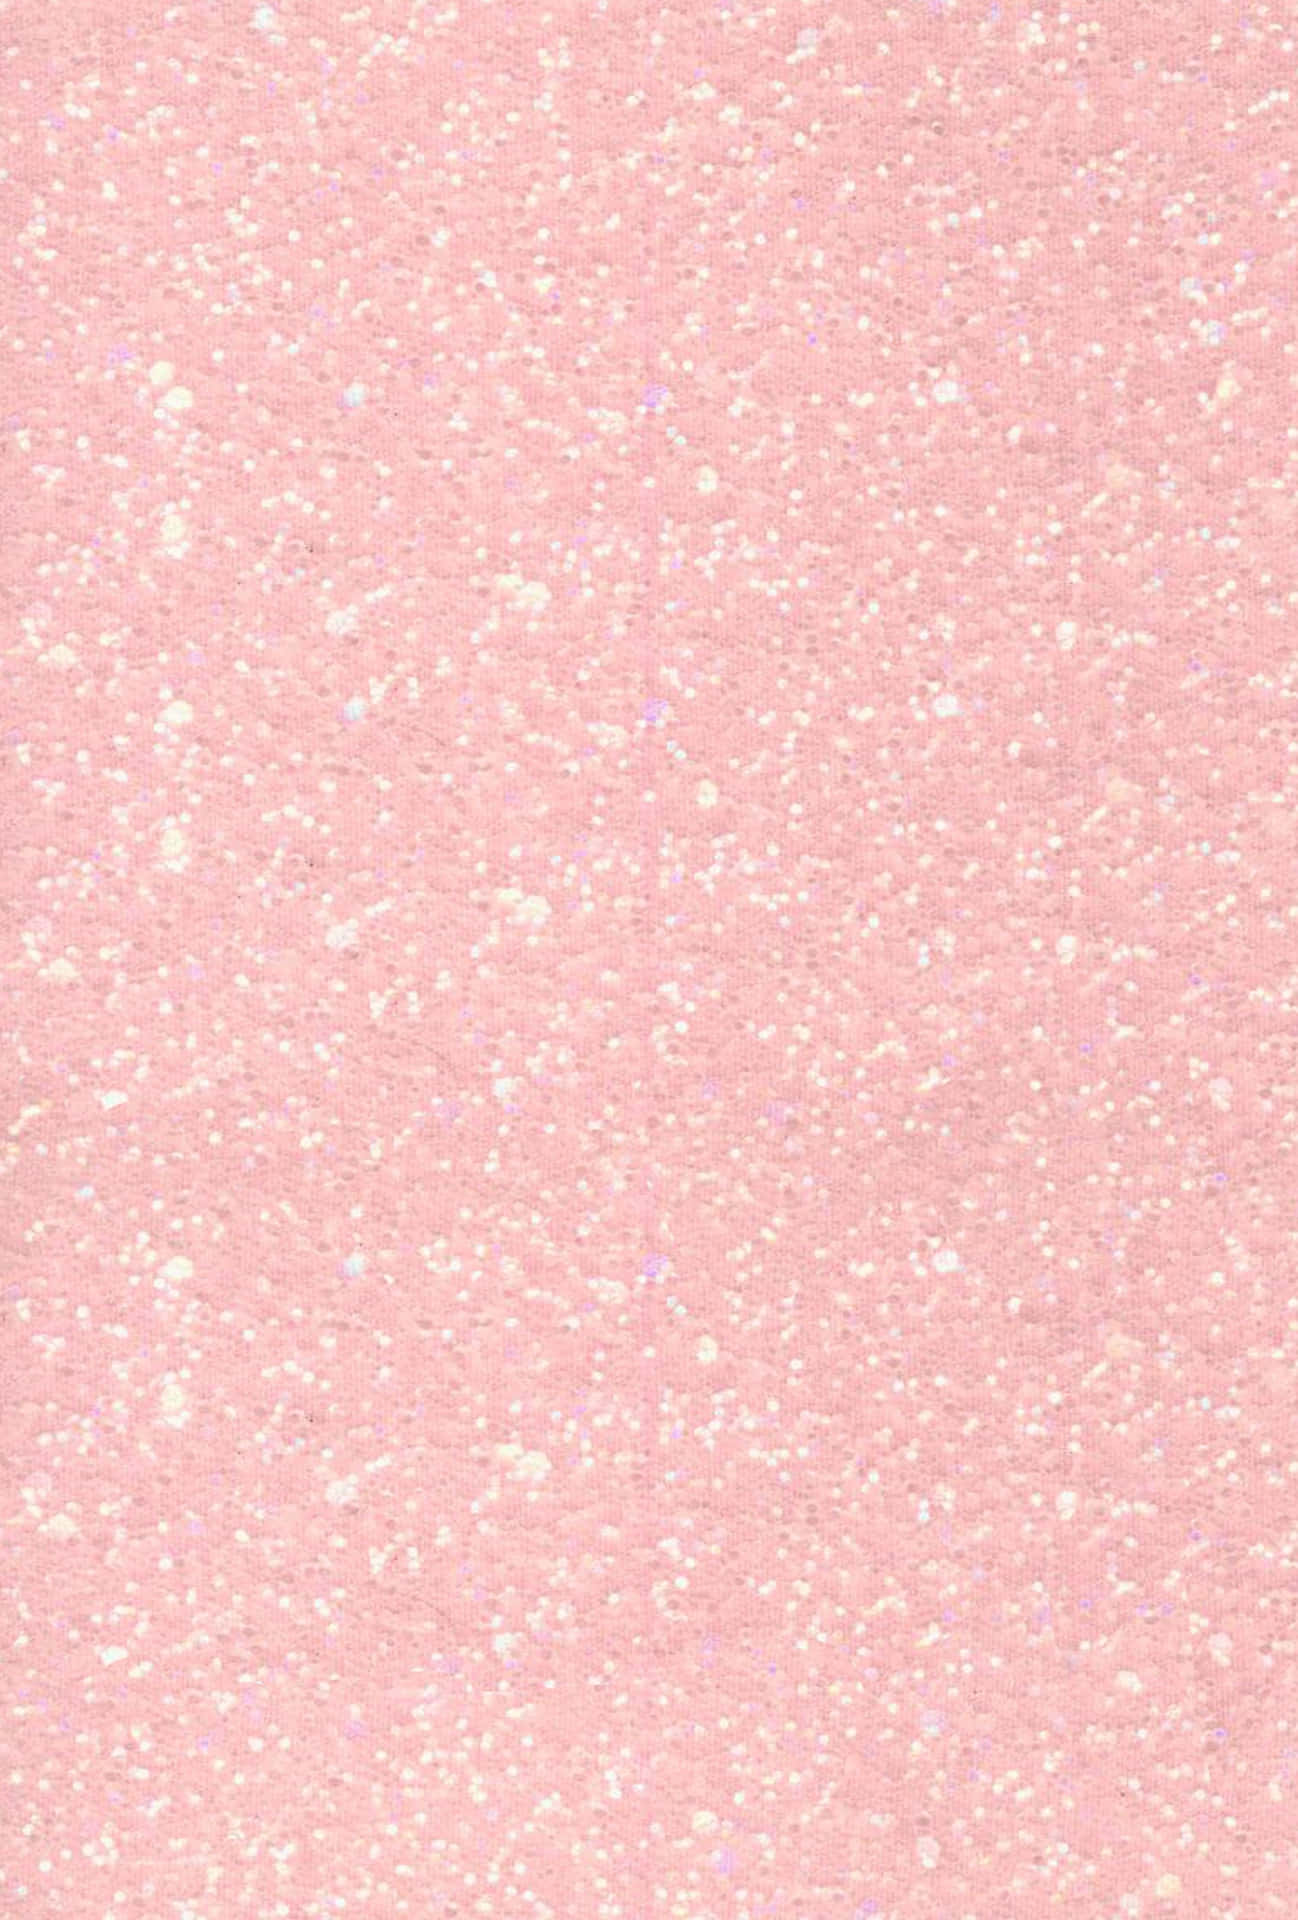 Pale Pink Background White Dots